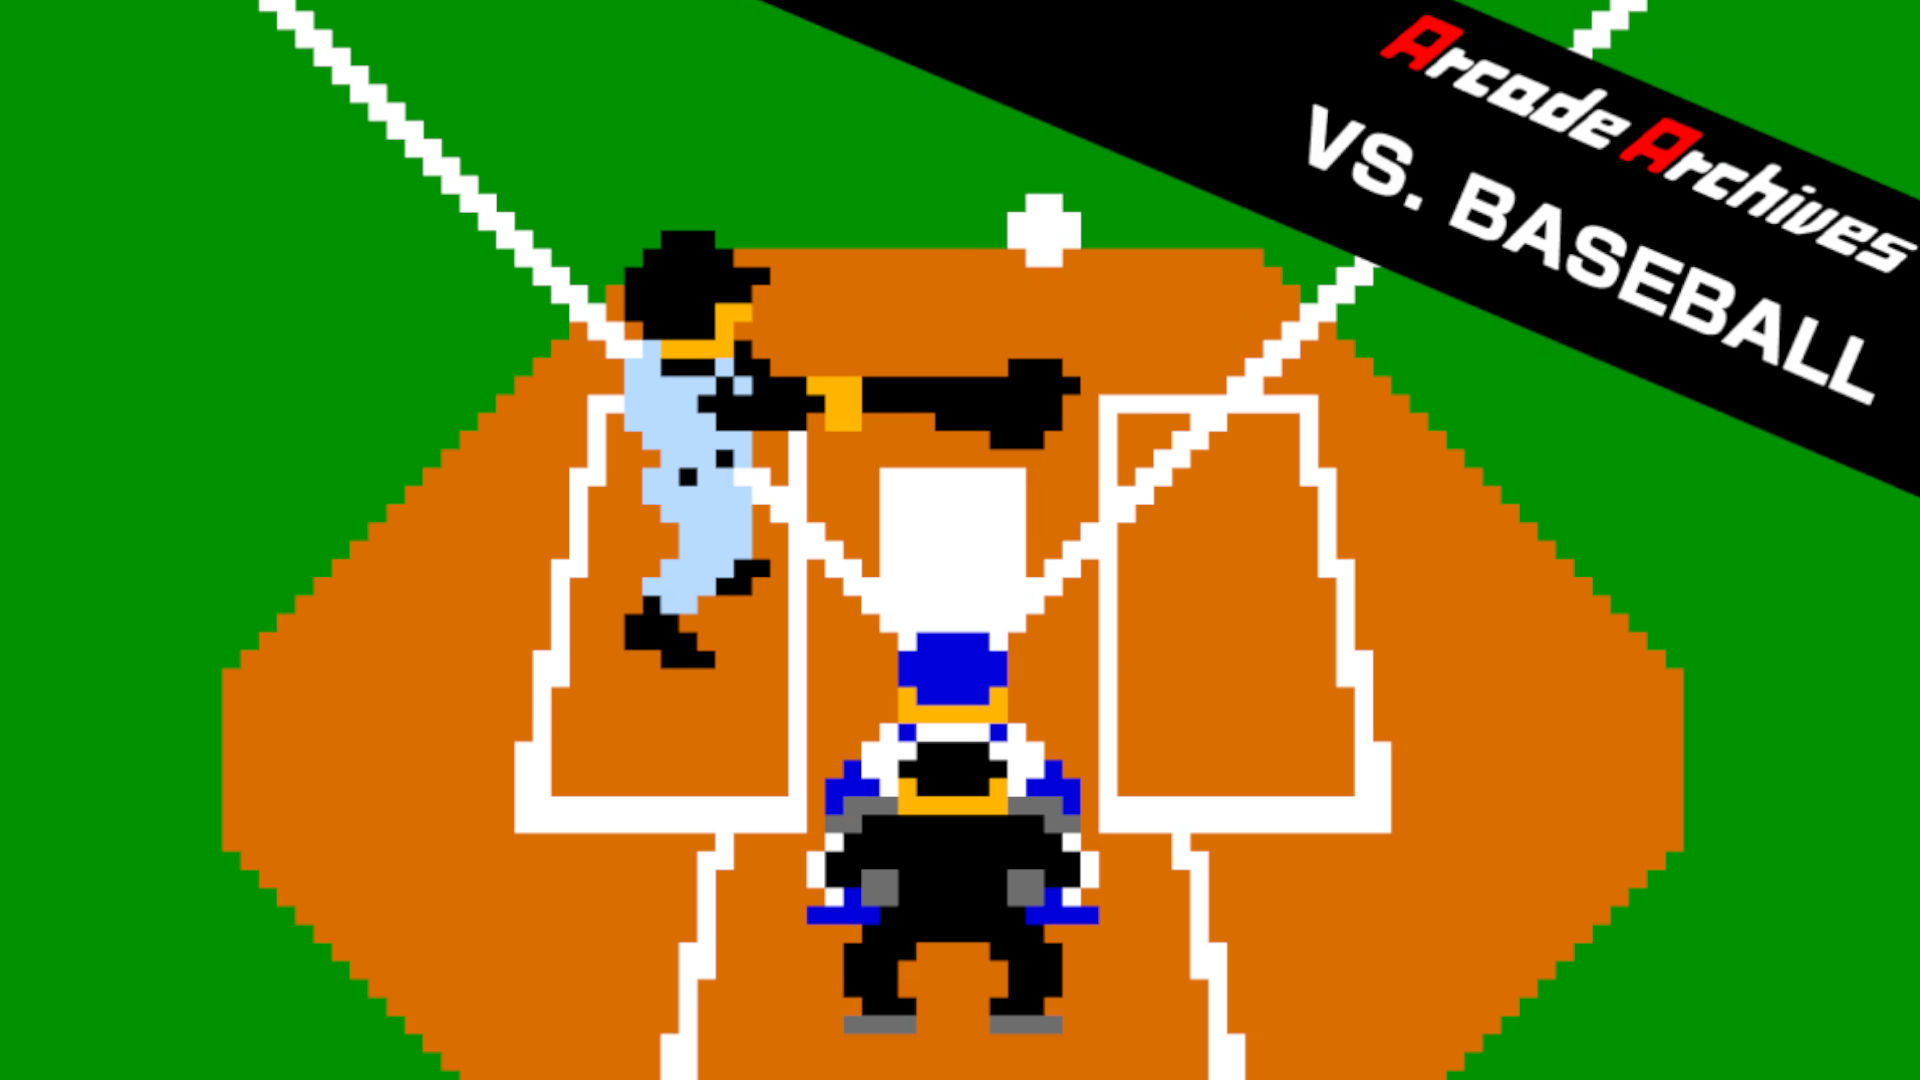 Cover for Arcade Archives VS Baseball, one of the arcade archives baseball games from the collection